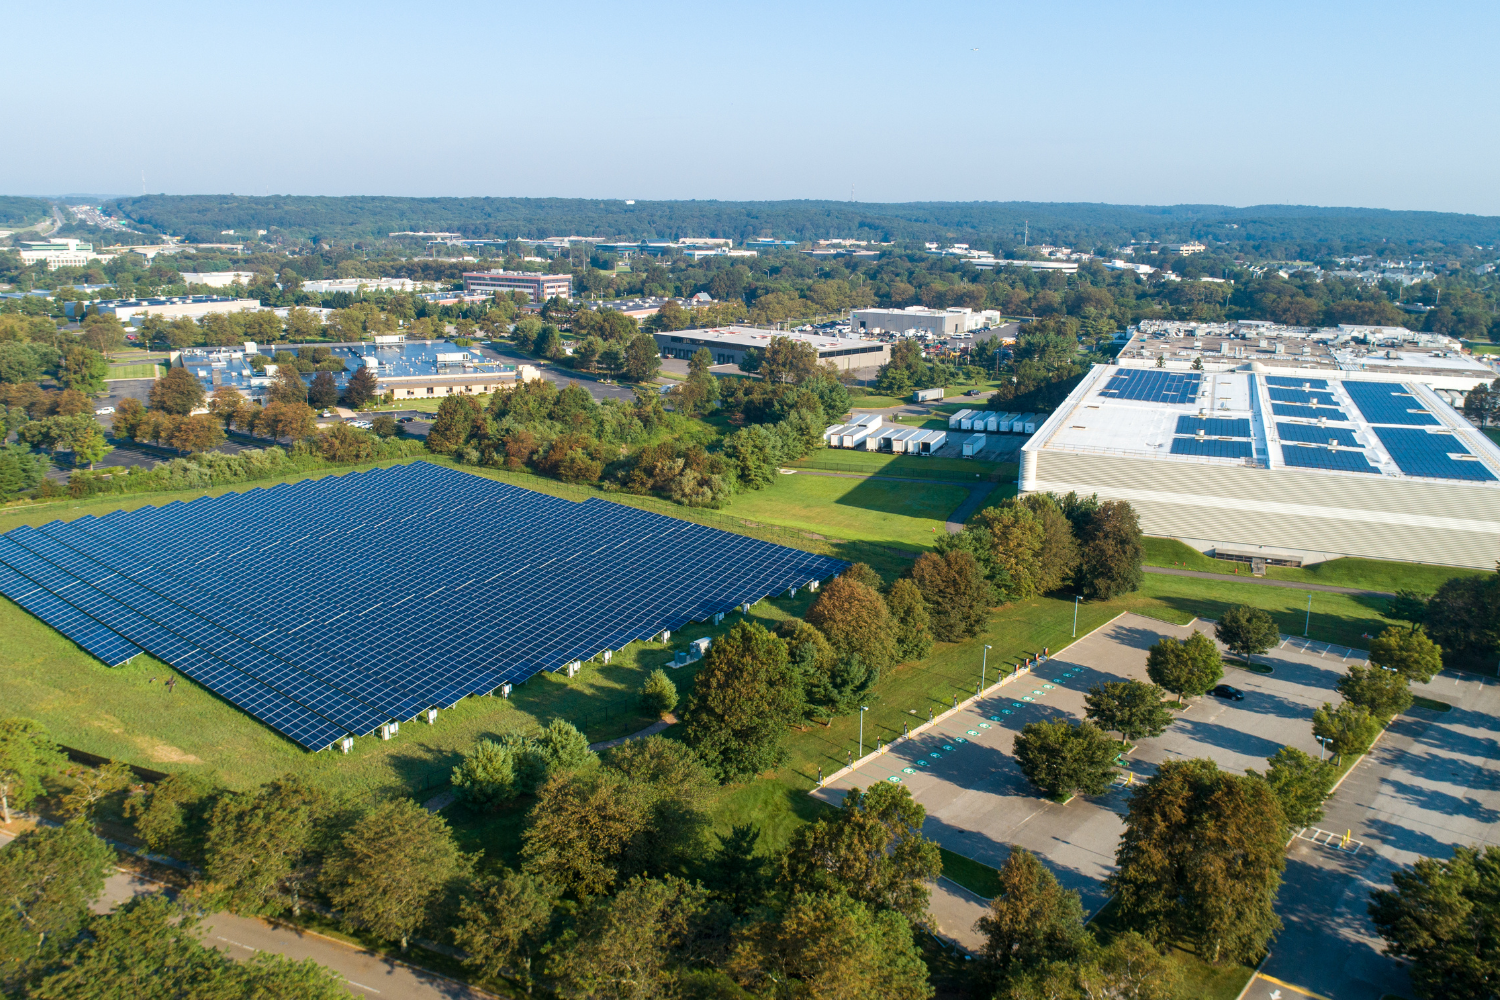 A wide open space on Long Island has solar panels installed to generate clean energy. NY-SUN initiative expansion will help New York become nation